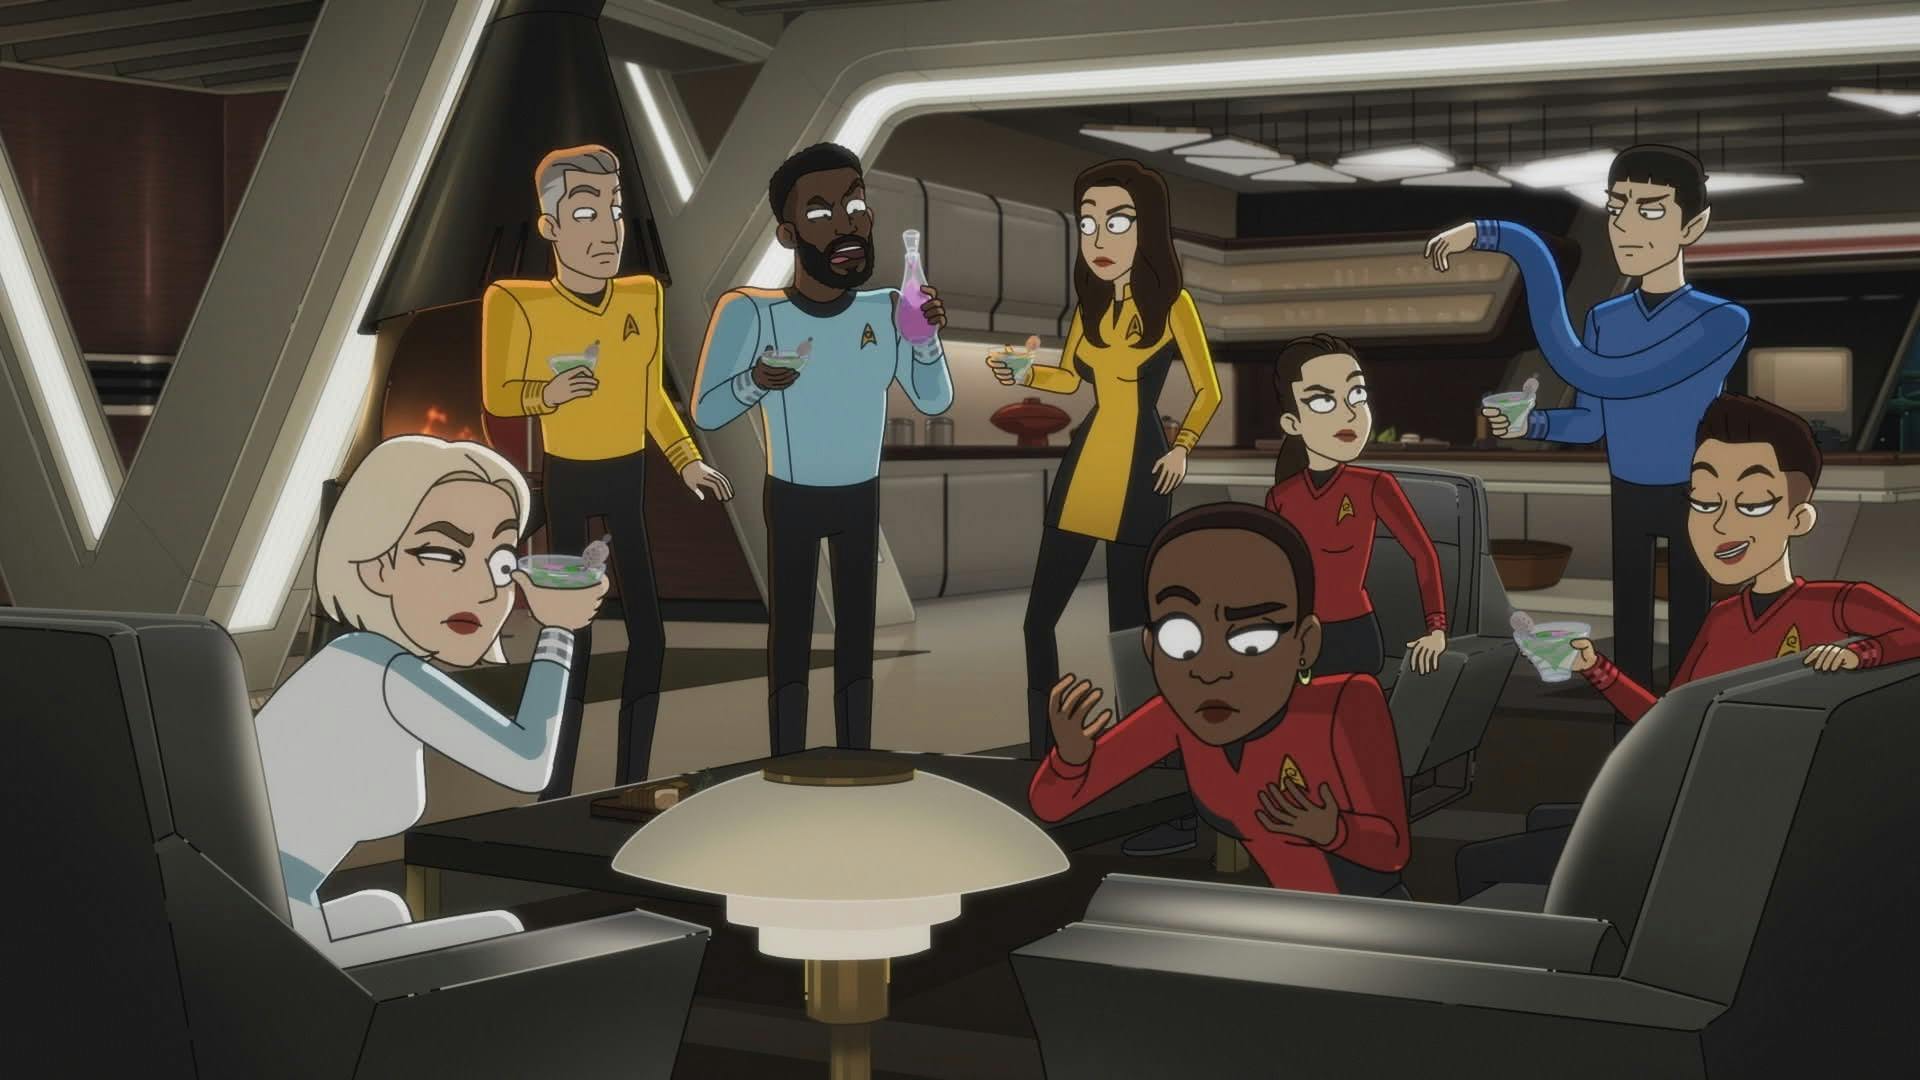 While drinking genuine Orion delaq in Pike's Captain's Quarters, the crew of the Enterprise question its 2D effects on themselves in 'Those Old Scientists'